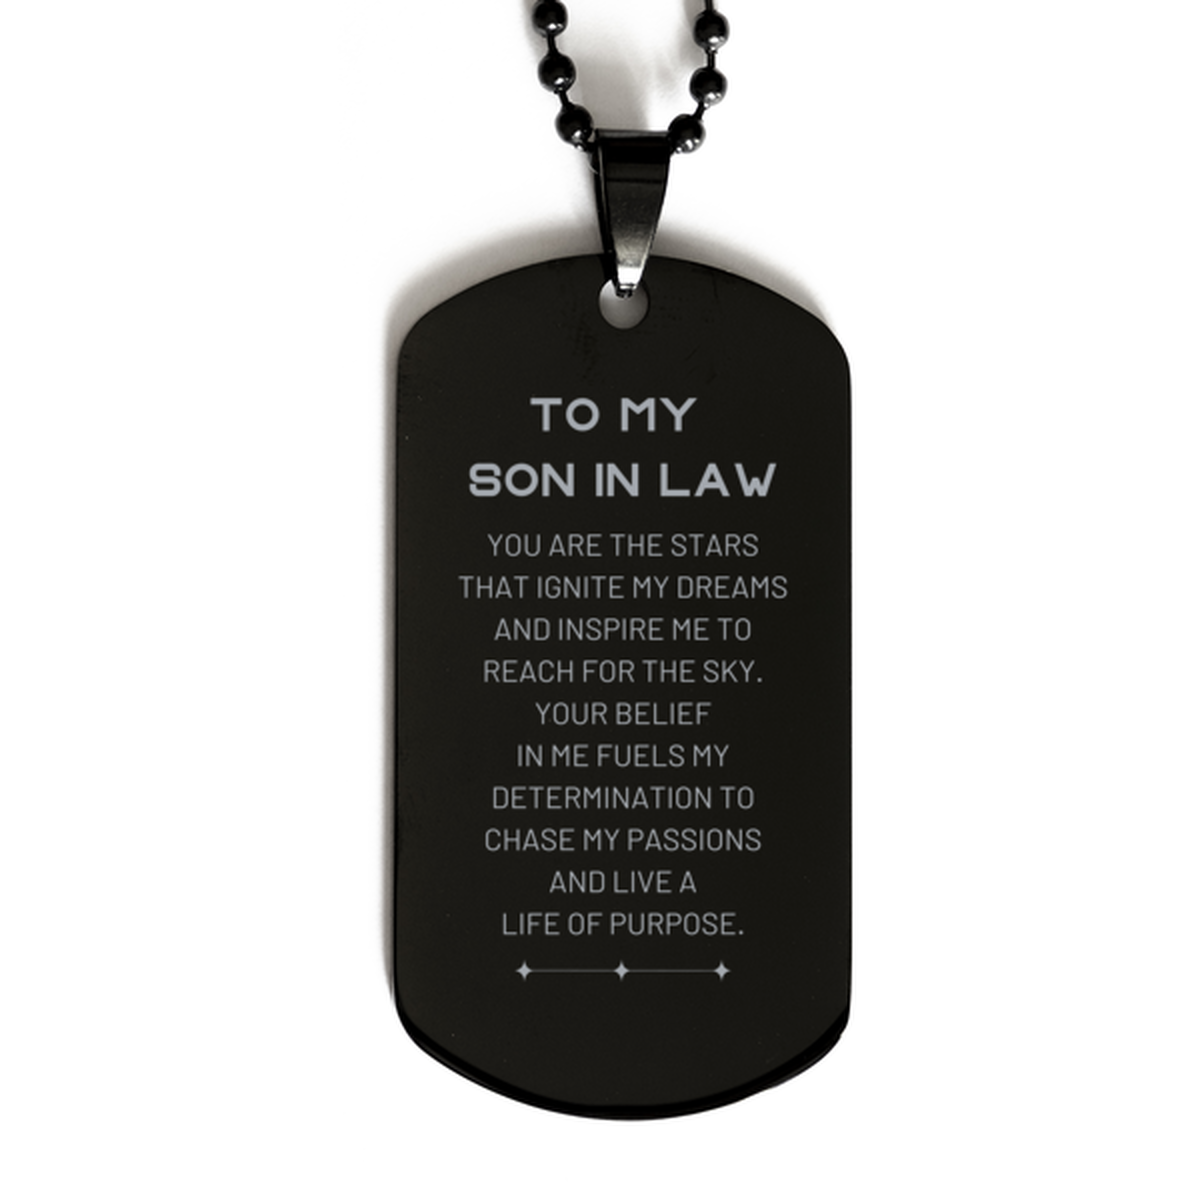 To My Son In Law Black Dog Tag, You are the stars that ignite my dreams and inspire me to reach for the sky, Birthday Unique Gifts For Son In Law, Thank You Gifts For Son In Law